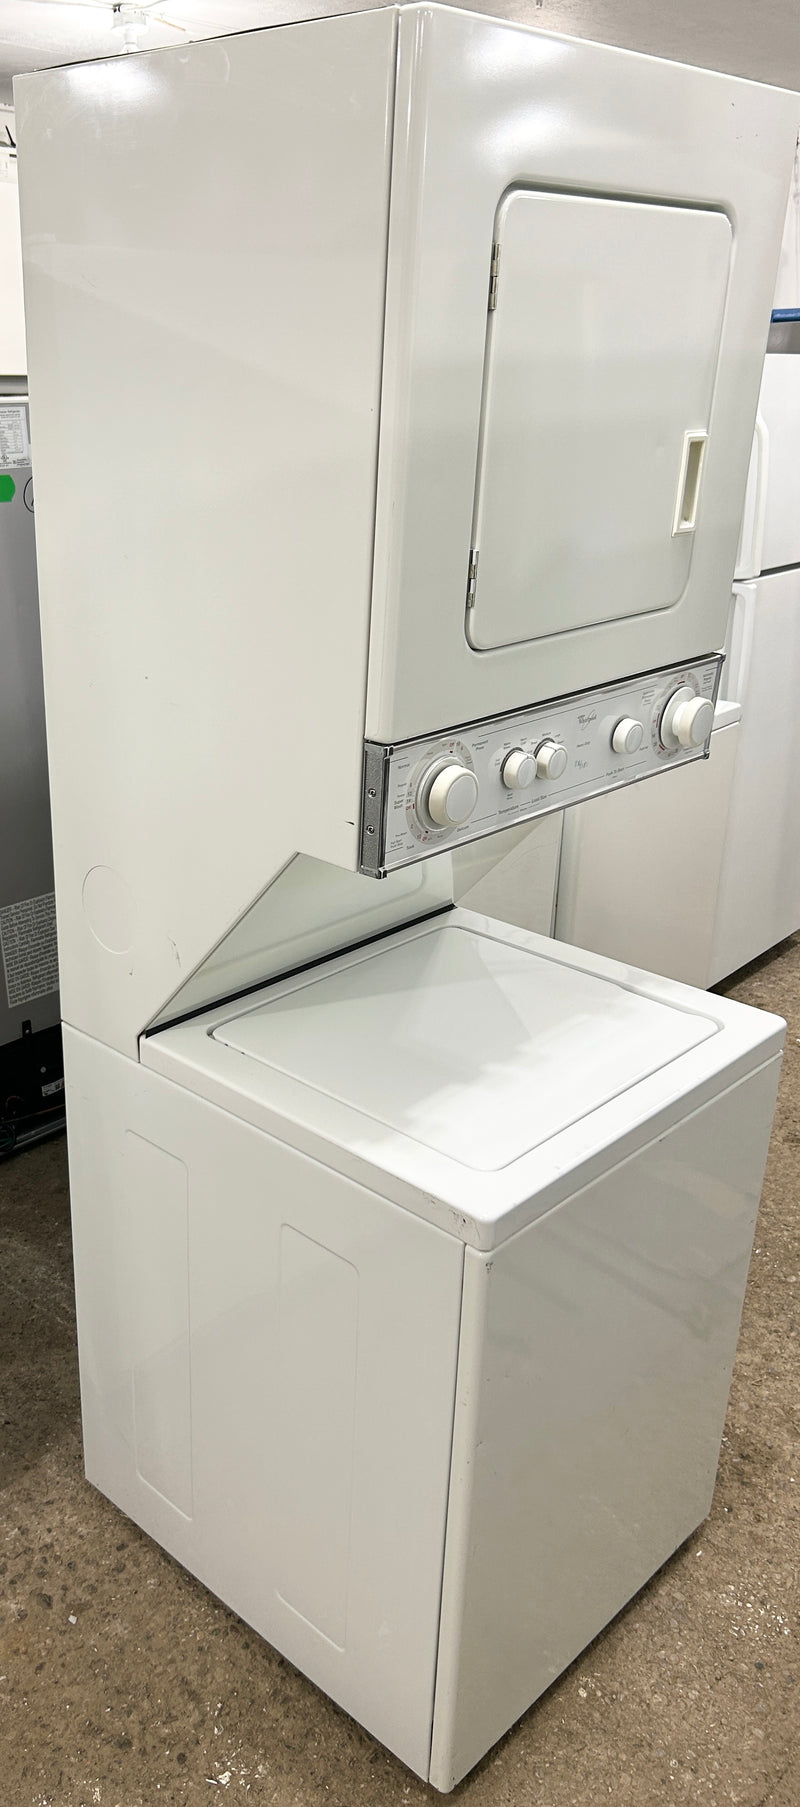 Whirlpool 24" Wide Apartment Size Laundry Center (AKA Stacker), Free 60 Day Warranty